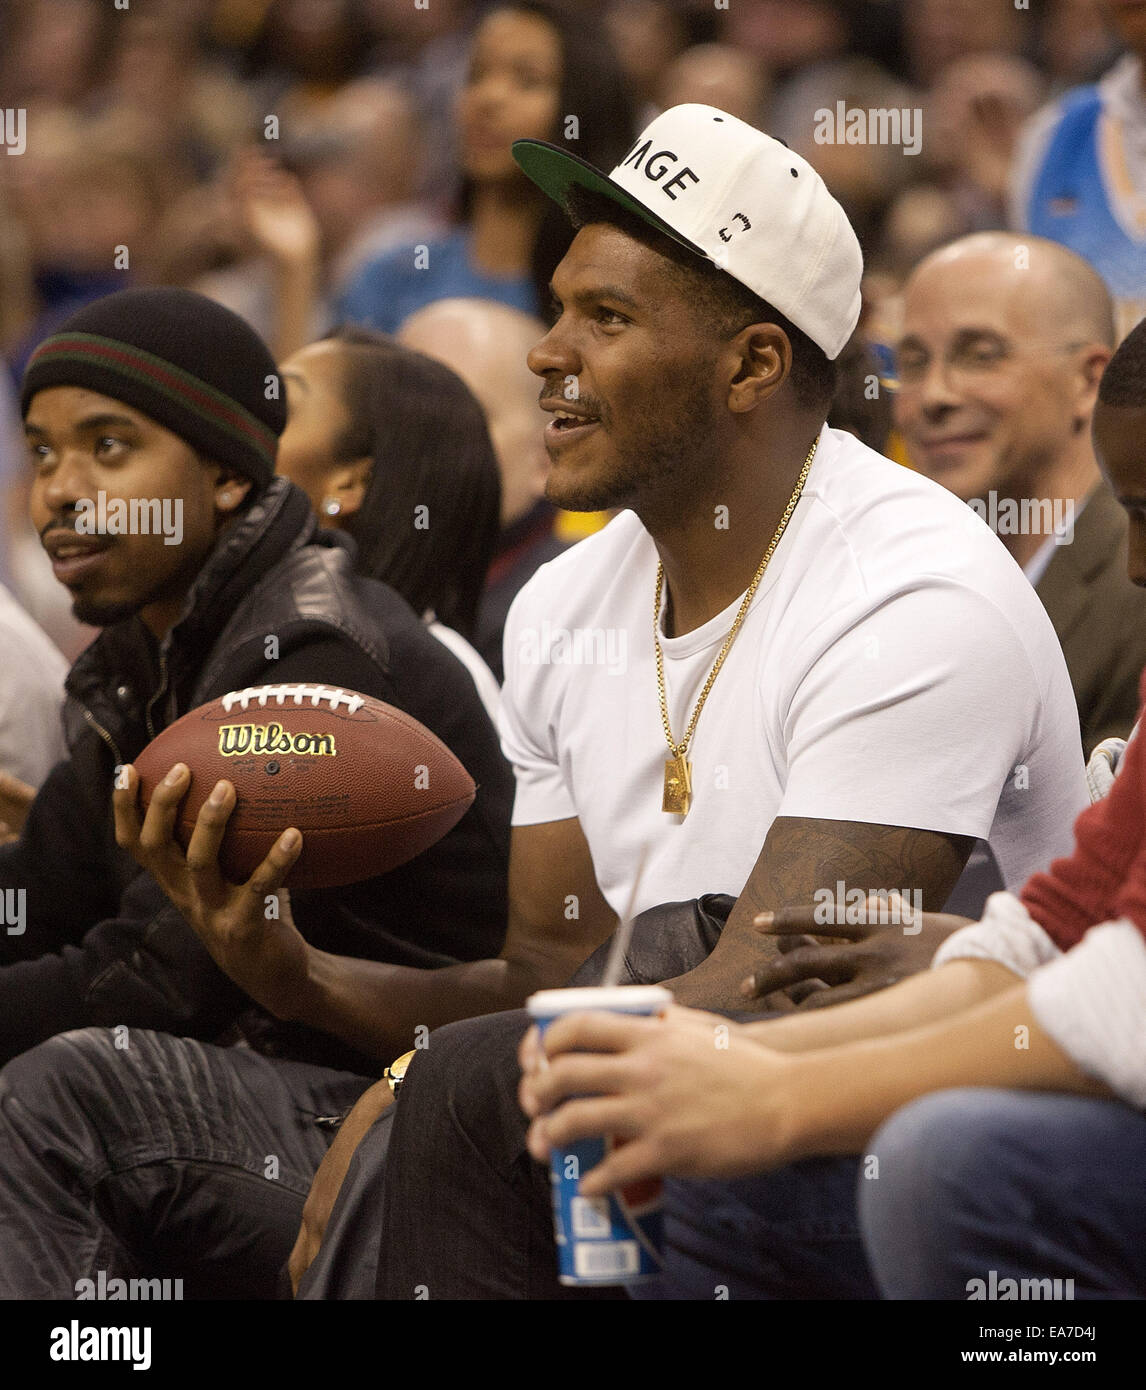 Denver, Colorado, USA. 7th Nov, 2014. Broncos TE JULIUS THOMAS gets a football from Nuggets mascot Rocky to autograph before launching it into the crowd during the 1st. half at the Pepsi Center Fri. night. The Cavaliers beat the Nuggets 110-101. Credit:  Hector Acevedo/ZUMA Wire/Alamy Live News Stock Photo